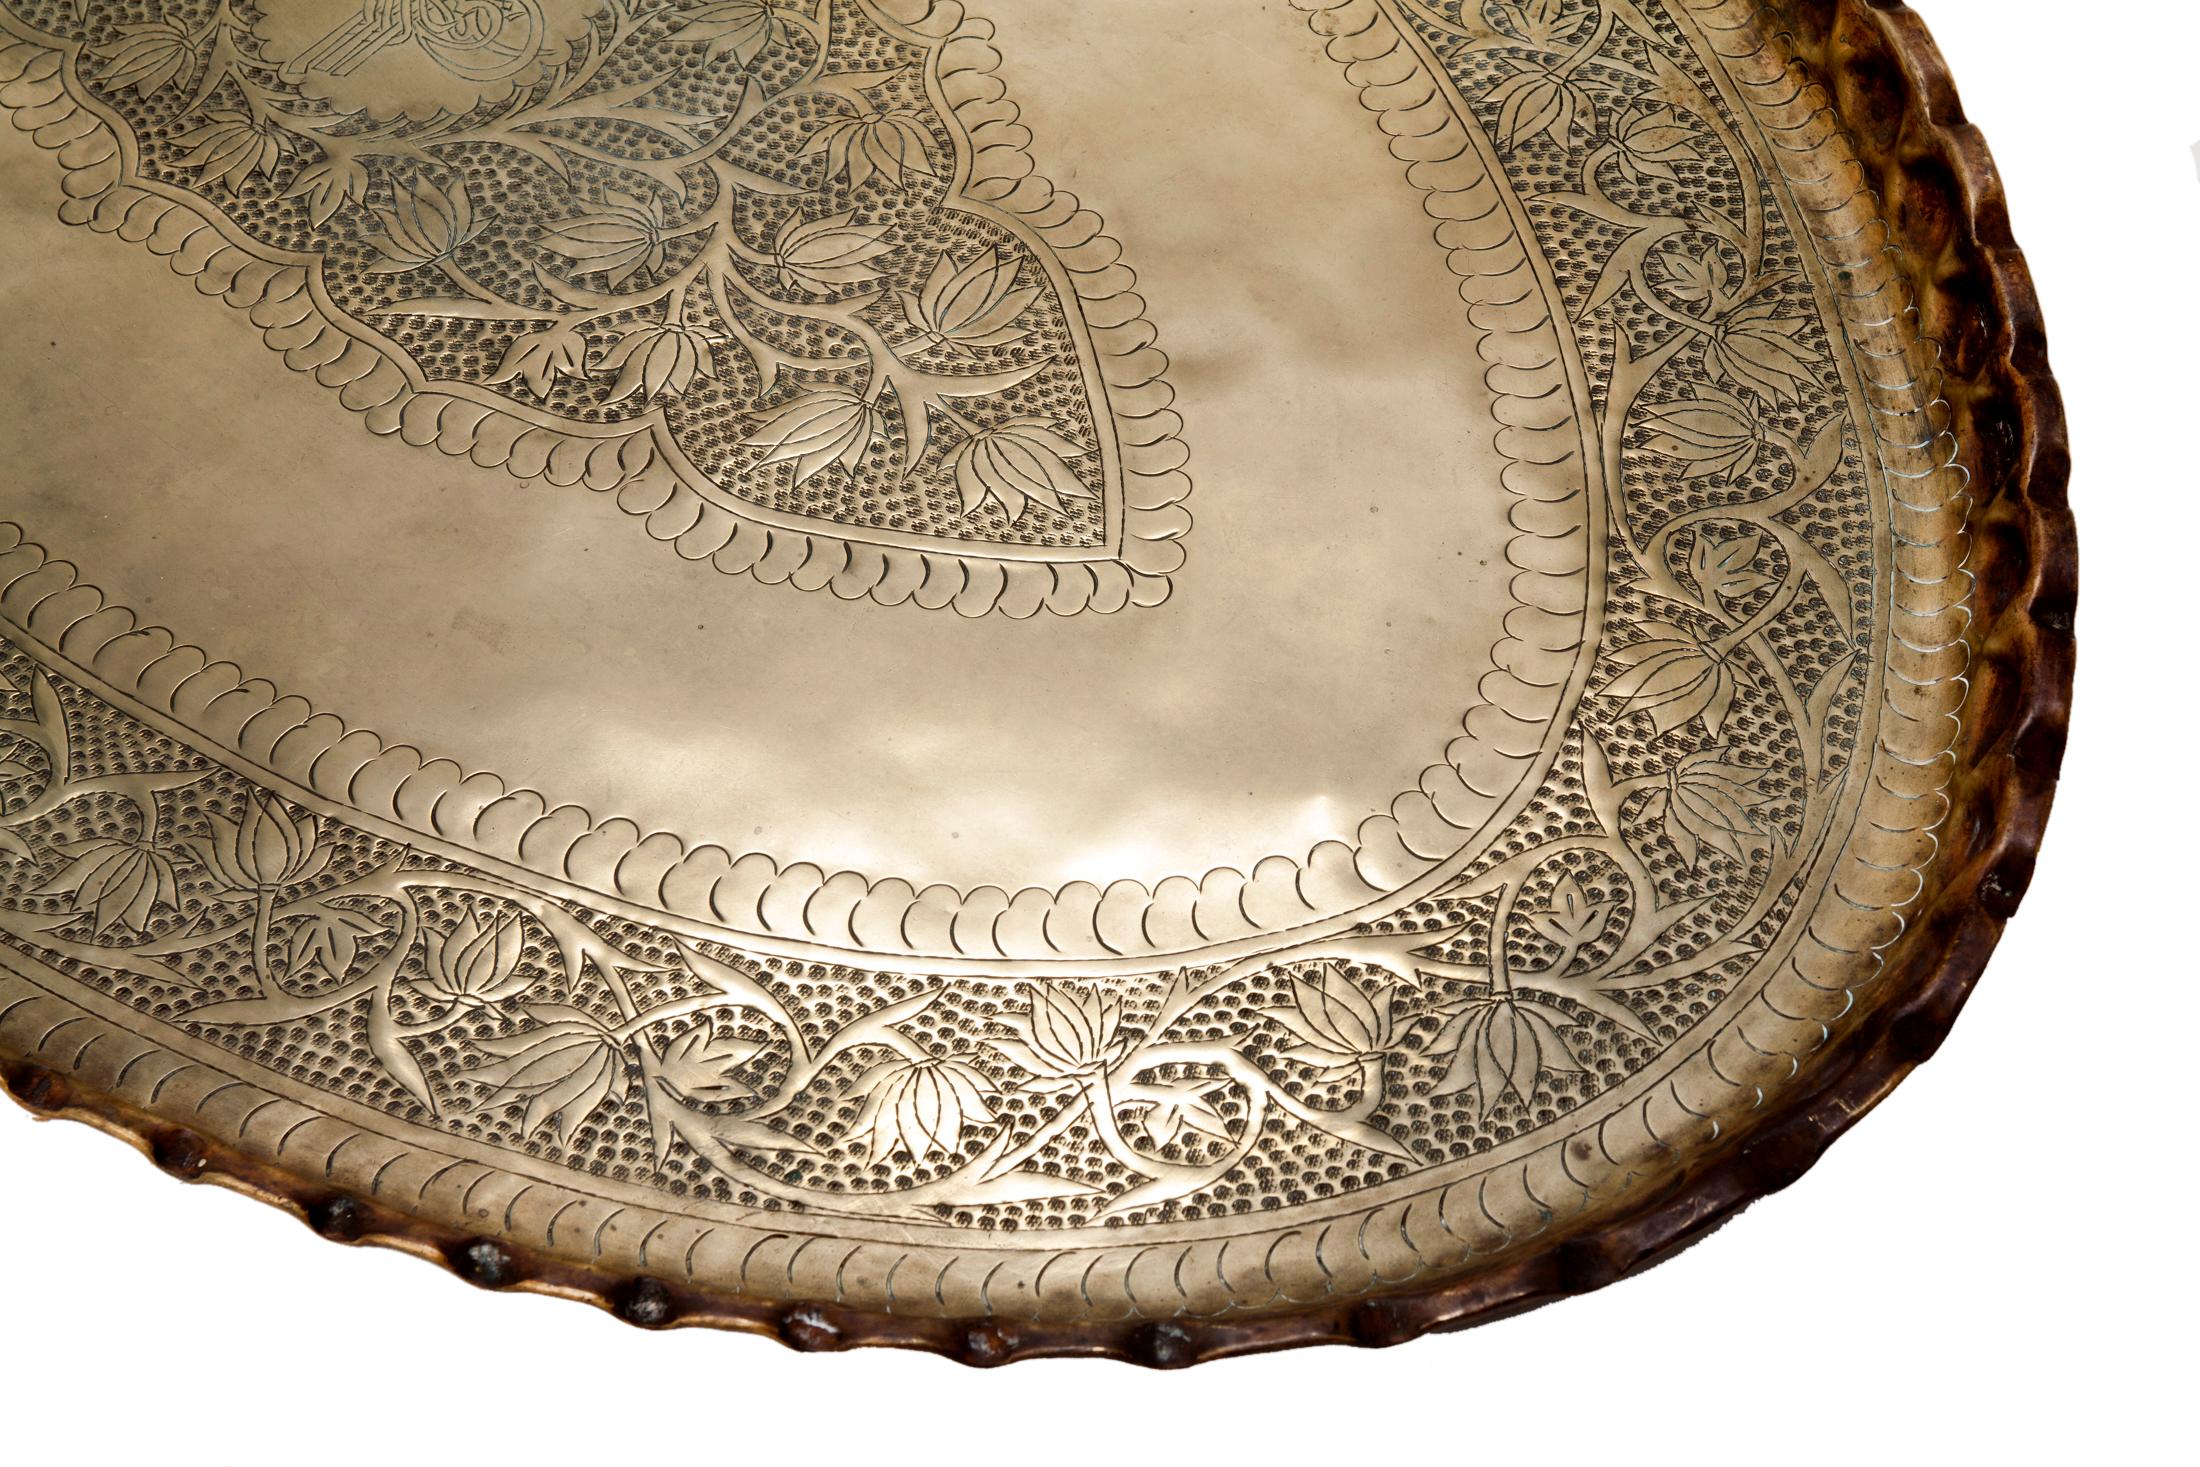 Fabulous very large handcrafted oval decorative brass tray.
Very fine metalwork, hand-hammered & embossed with a floral pattern & center medallion with a fluted edge.
Great to use on a coffee table or ottoman.